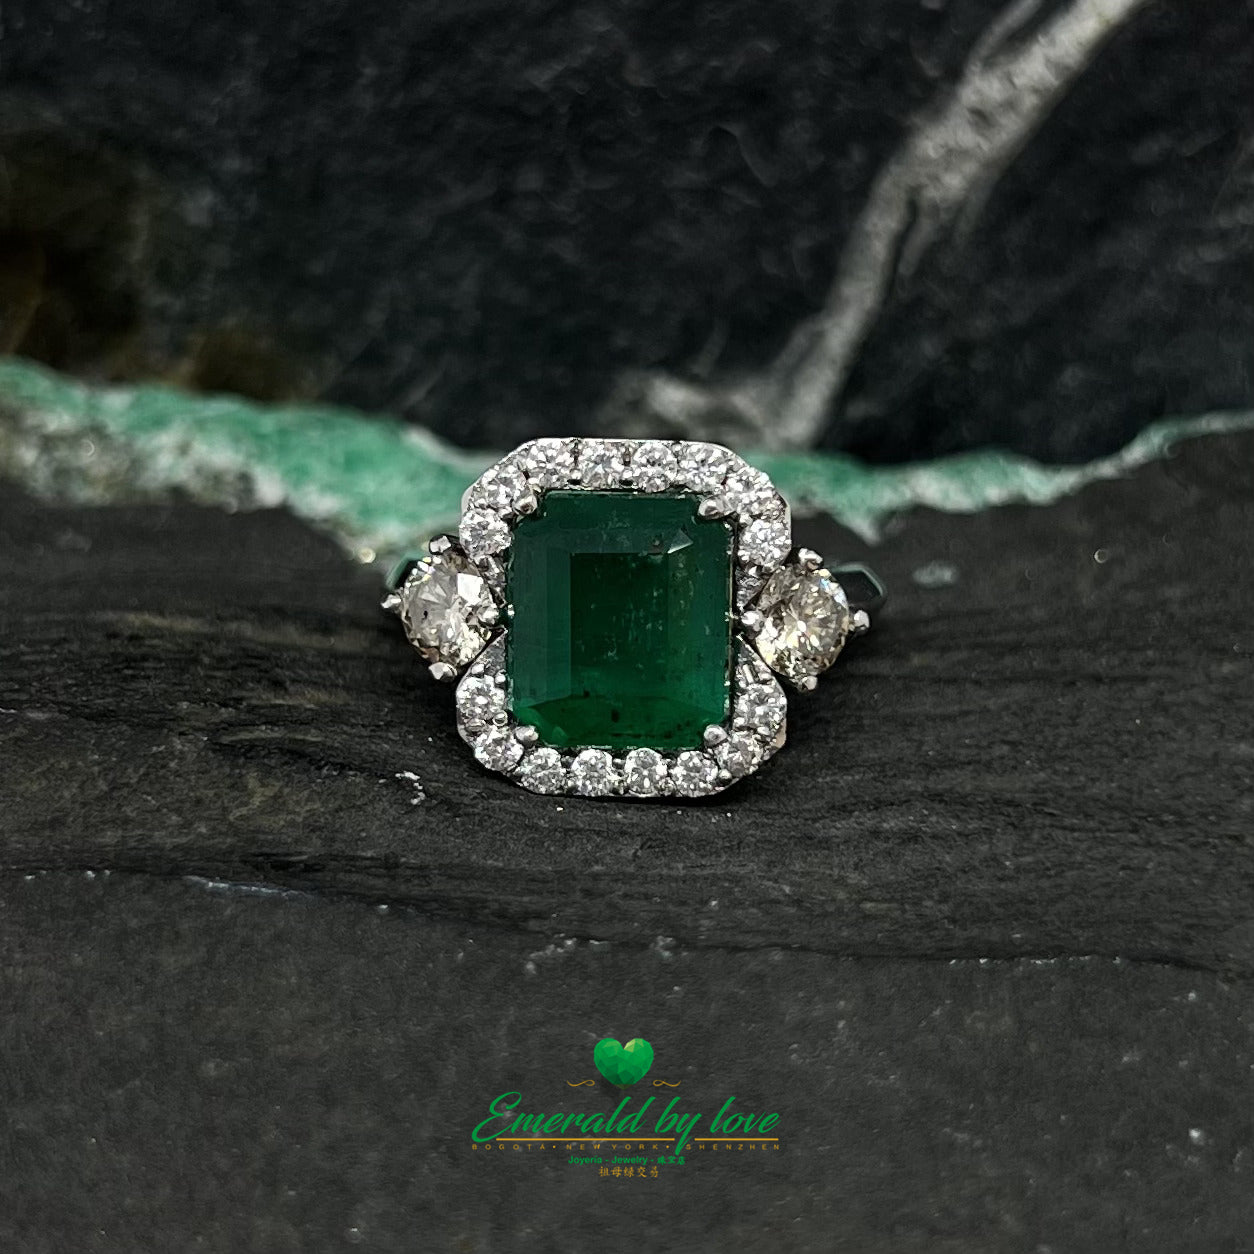 White Gold Ring with Emerald Cut Emerald Center, Flanked by Two Medium Diamonds, and Surrounded by Small Diamonds